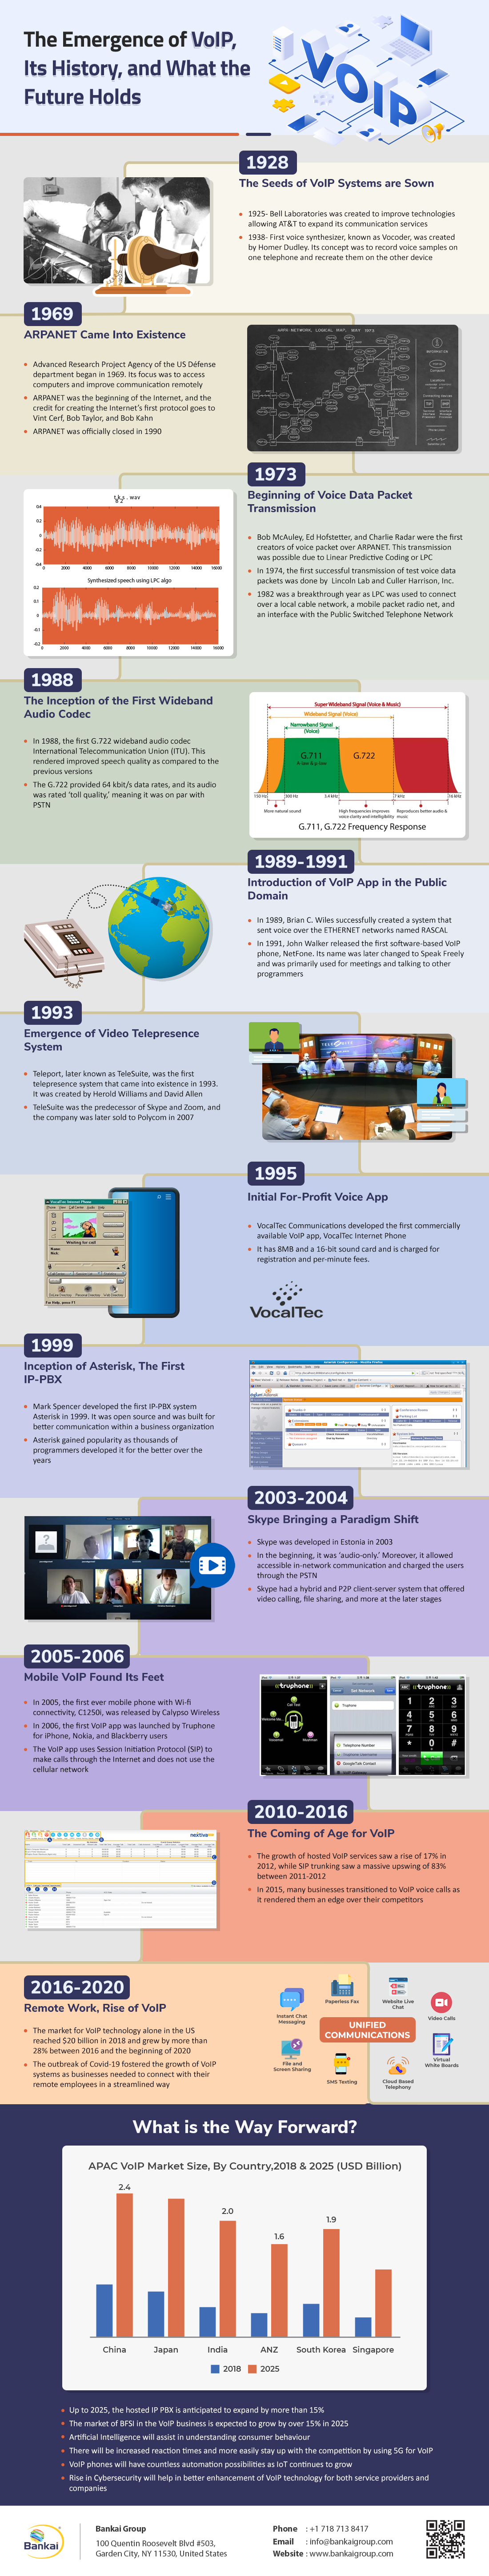 History of VoIP and VoIP Future